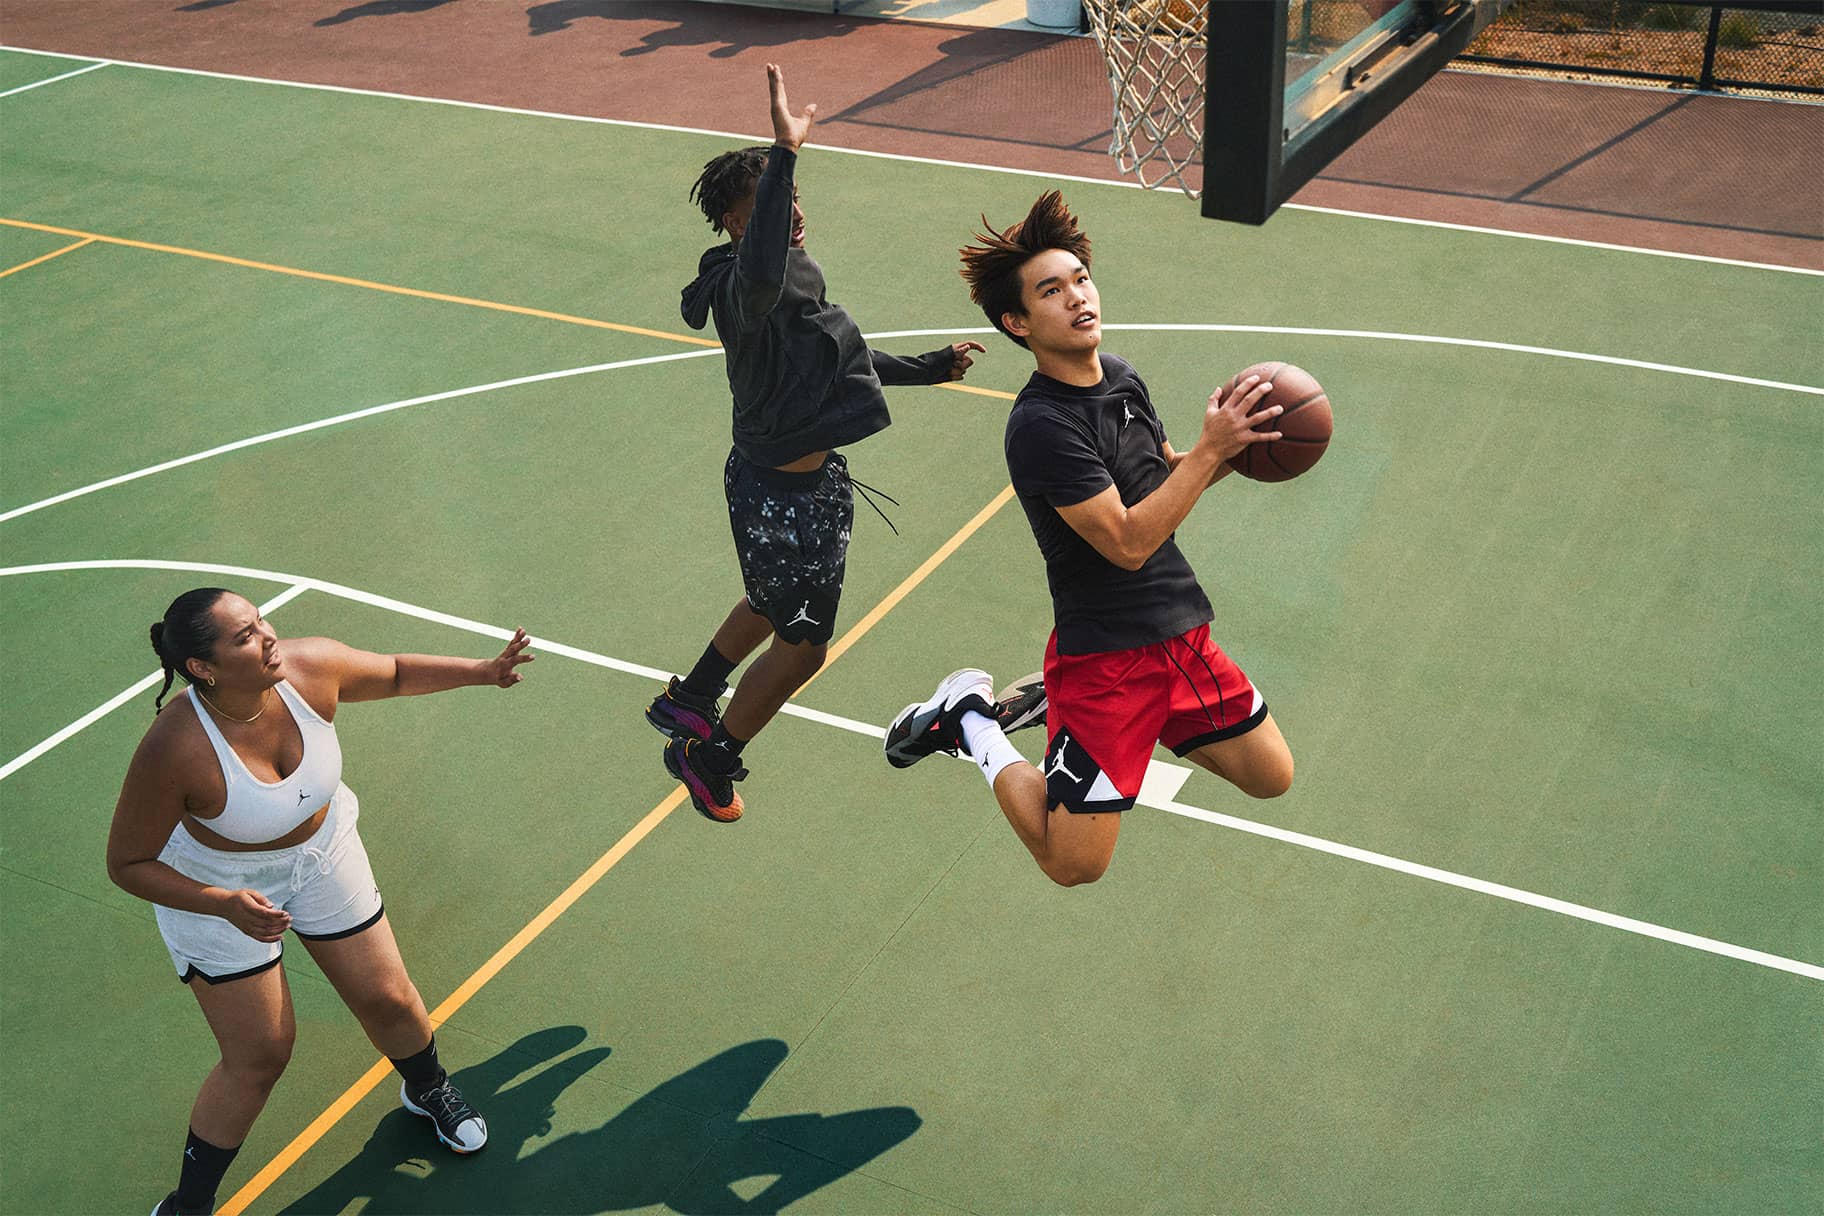 5 Benefits of Playing Basketball, According to Experts